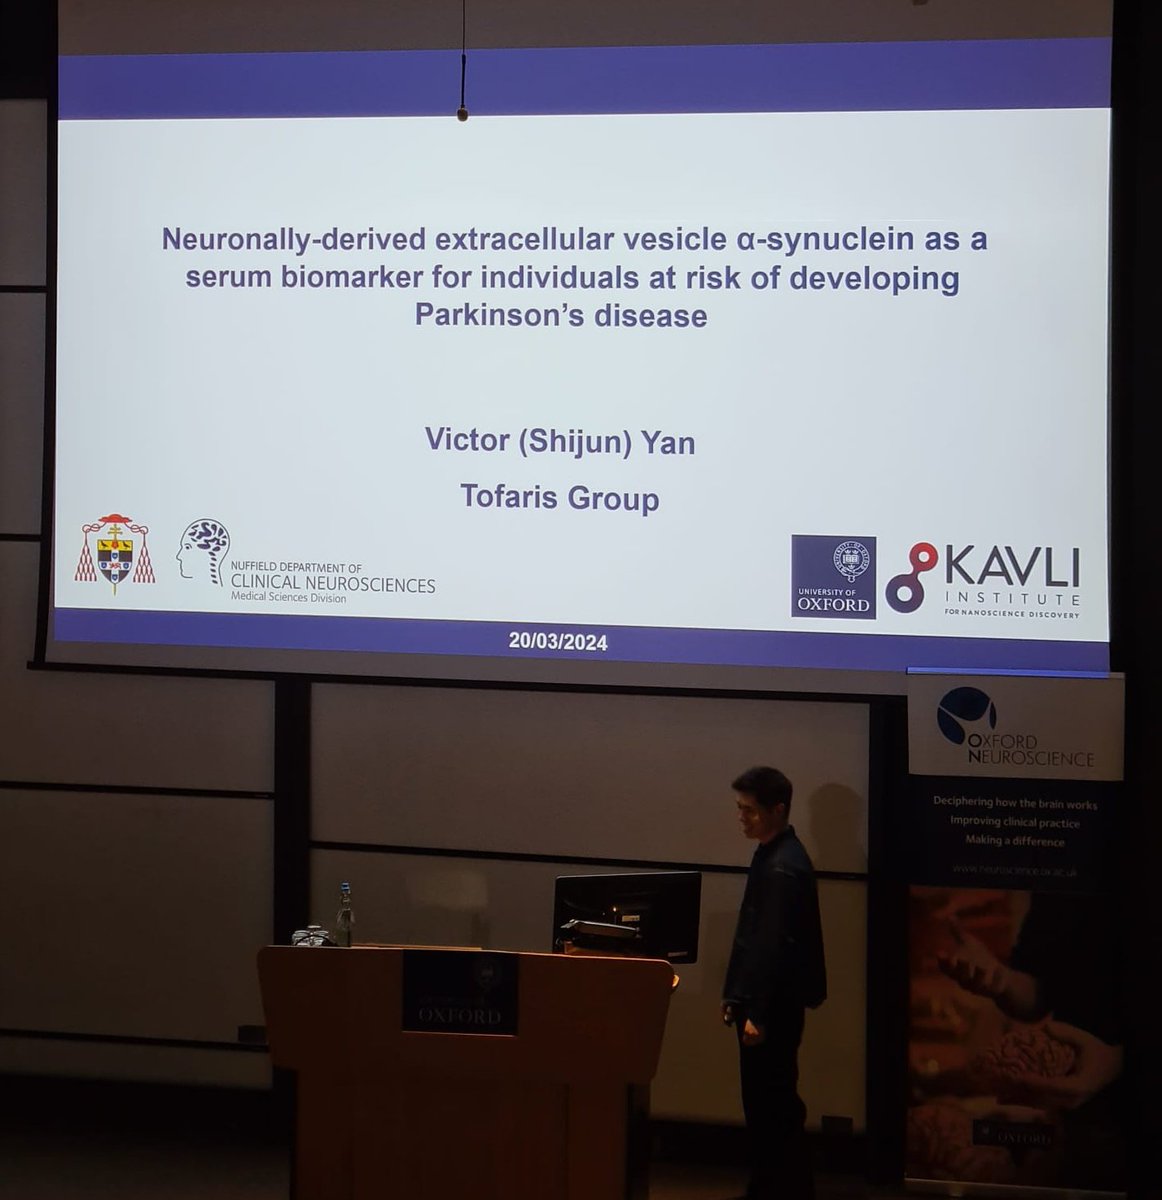 It was great to learn about all the exciting neuroscience research happening at the @UniofOxford . Victor discussed the potential of extracellular vesicles #EVs as early biomarkers for #Parkinsons. We are happy to discuss science with you all at @OxNeuro !! 🧠👩🏻‍🔬